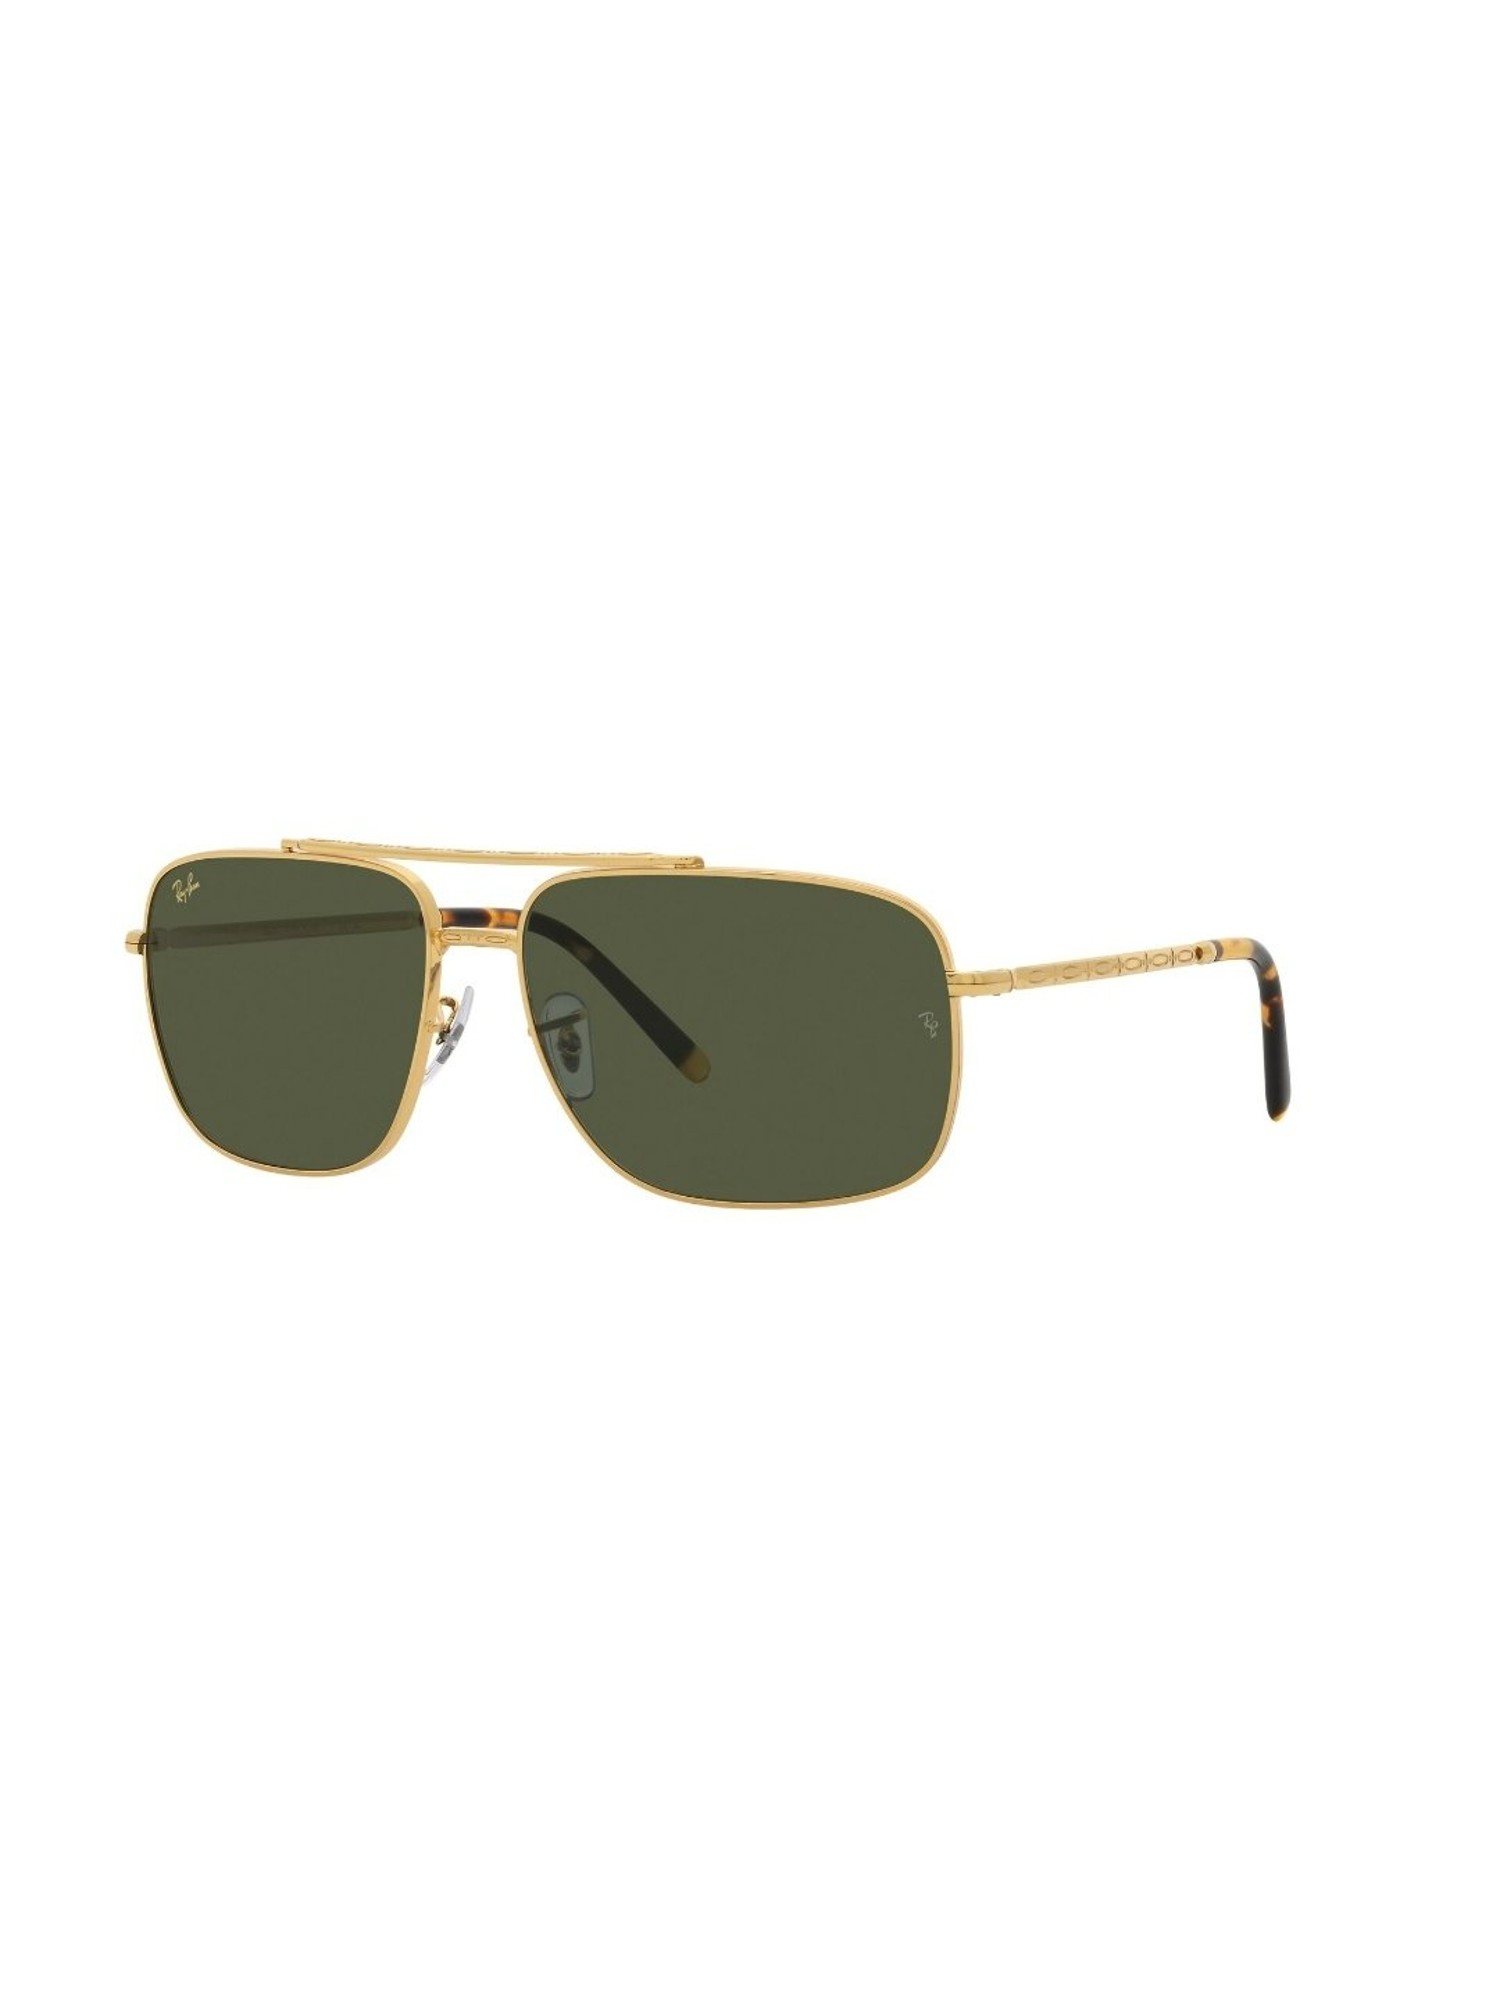 Ray-Ban Unisex UV Protected Green Lens Square Sunglasses - 0RB3016 : Ray-Ban:  Amazon.in: Fashion